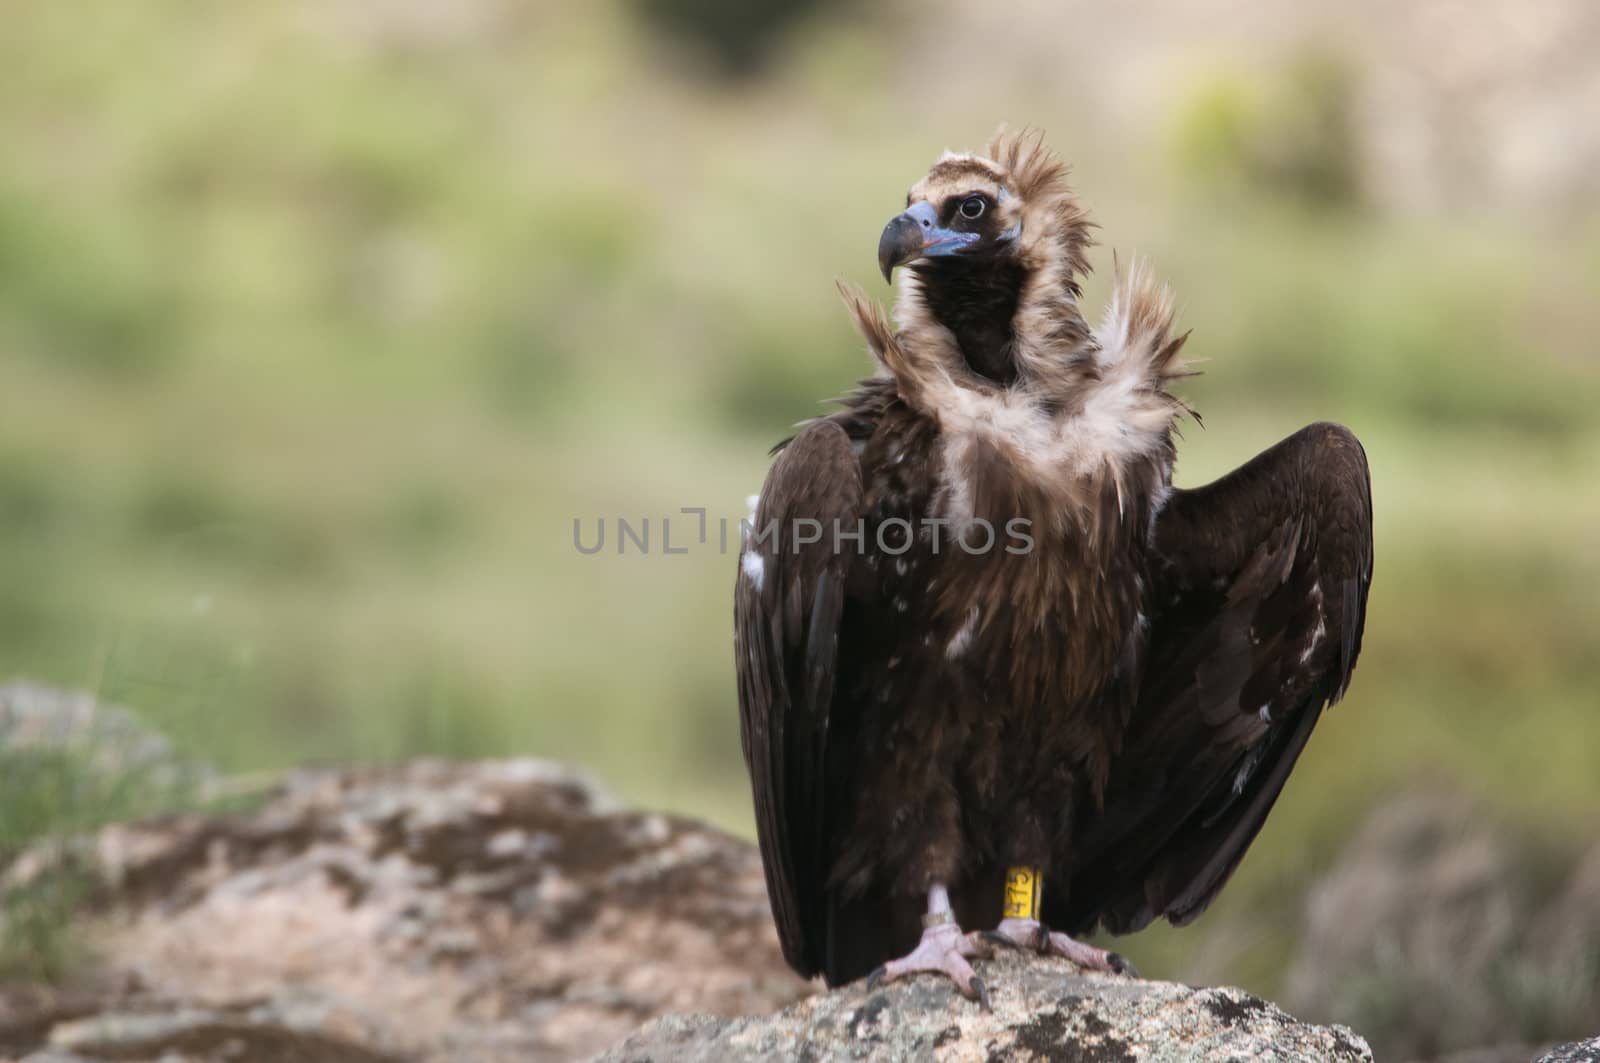 Cinereous Vulture, Aegypius monachus, standing on a rock by jalonsohu@gmail.com